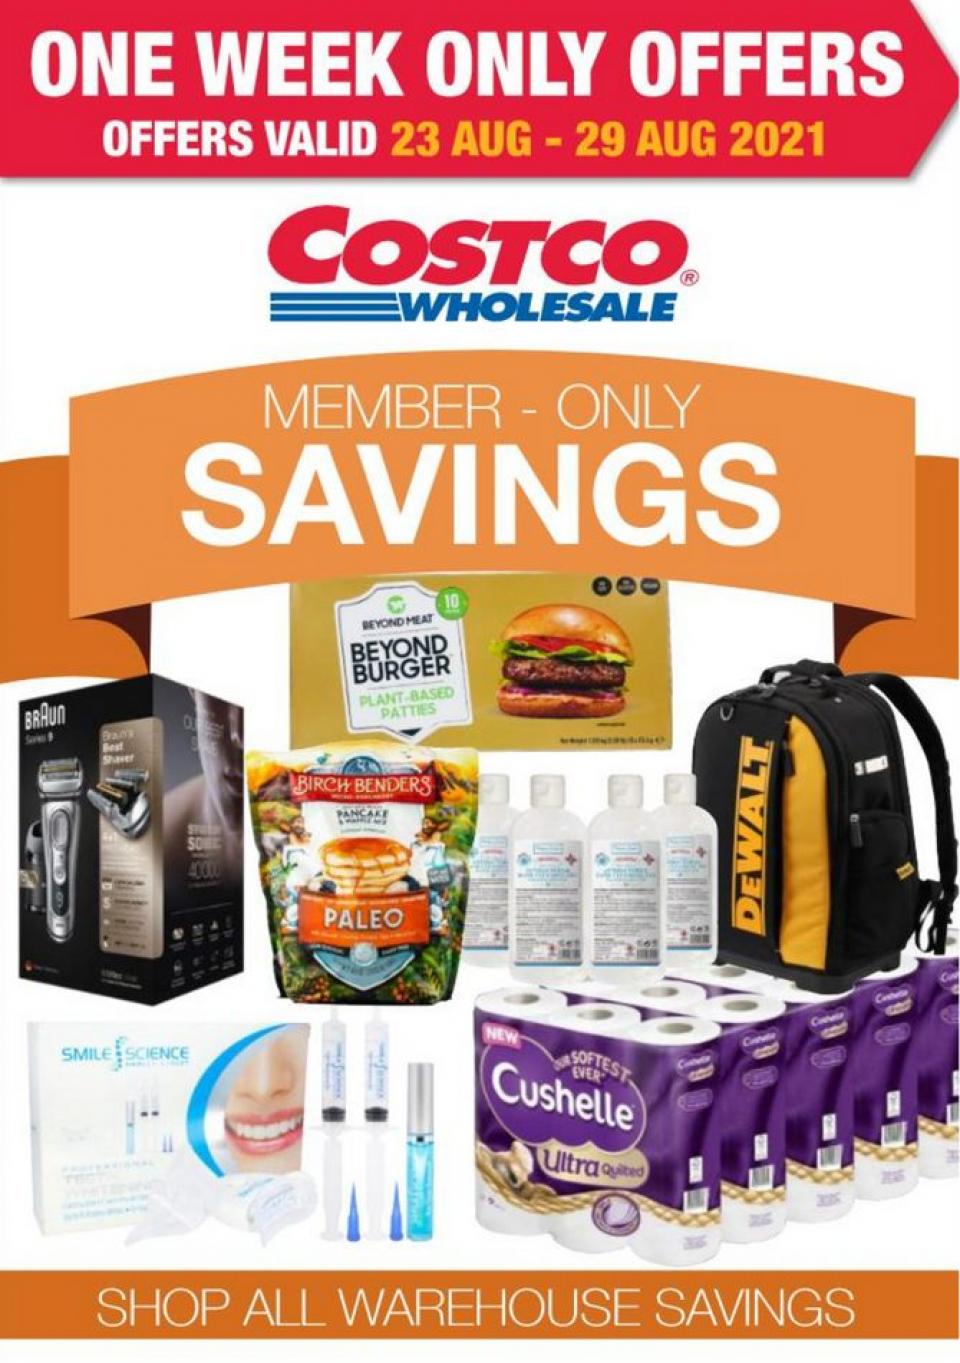 Costco Offers Member-Only Savings 23 – 29 August 2021